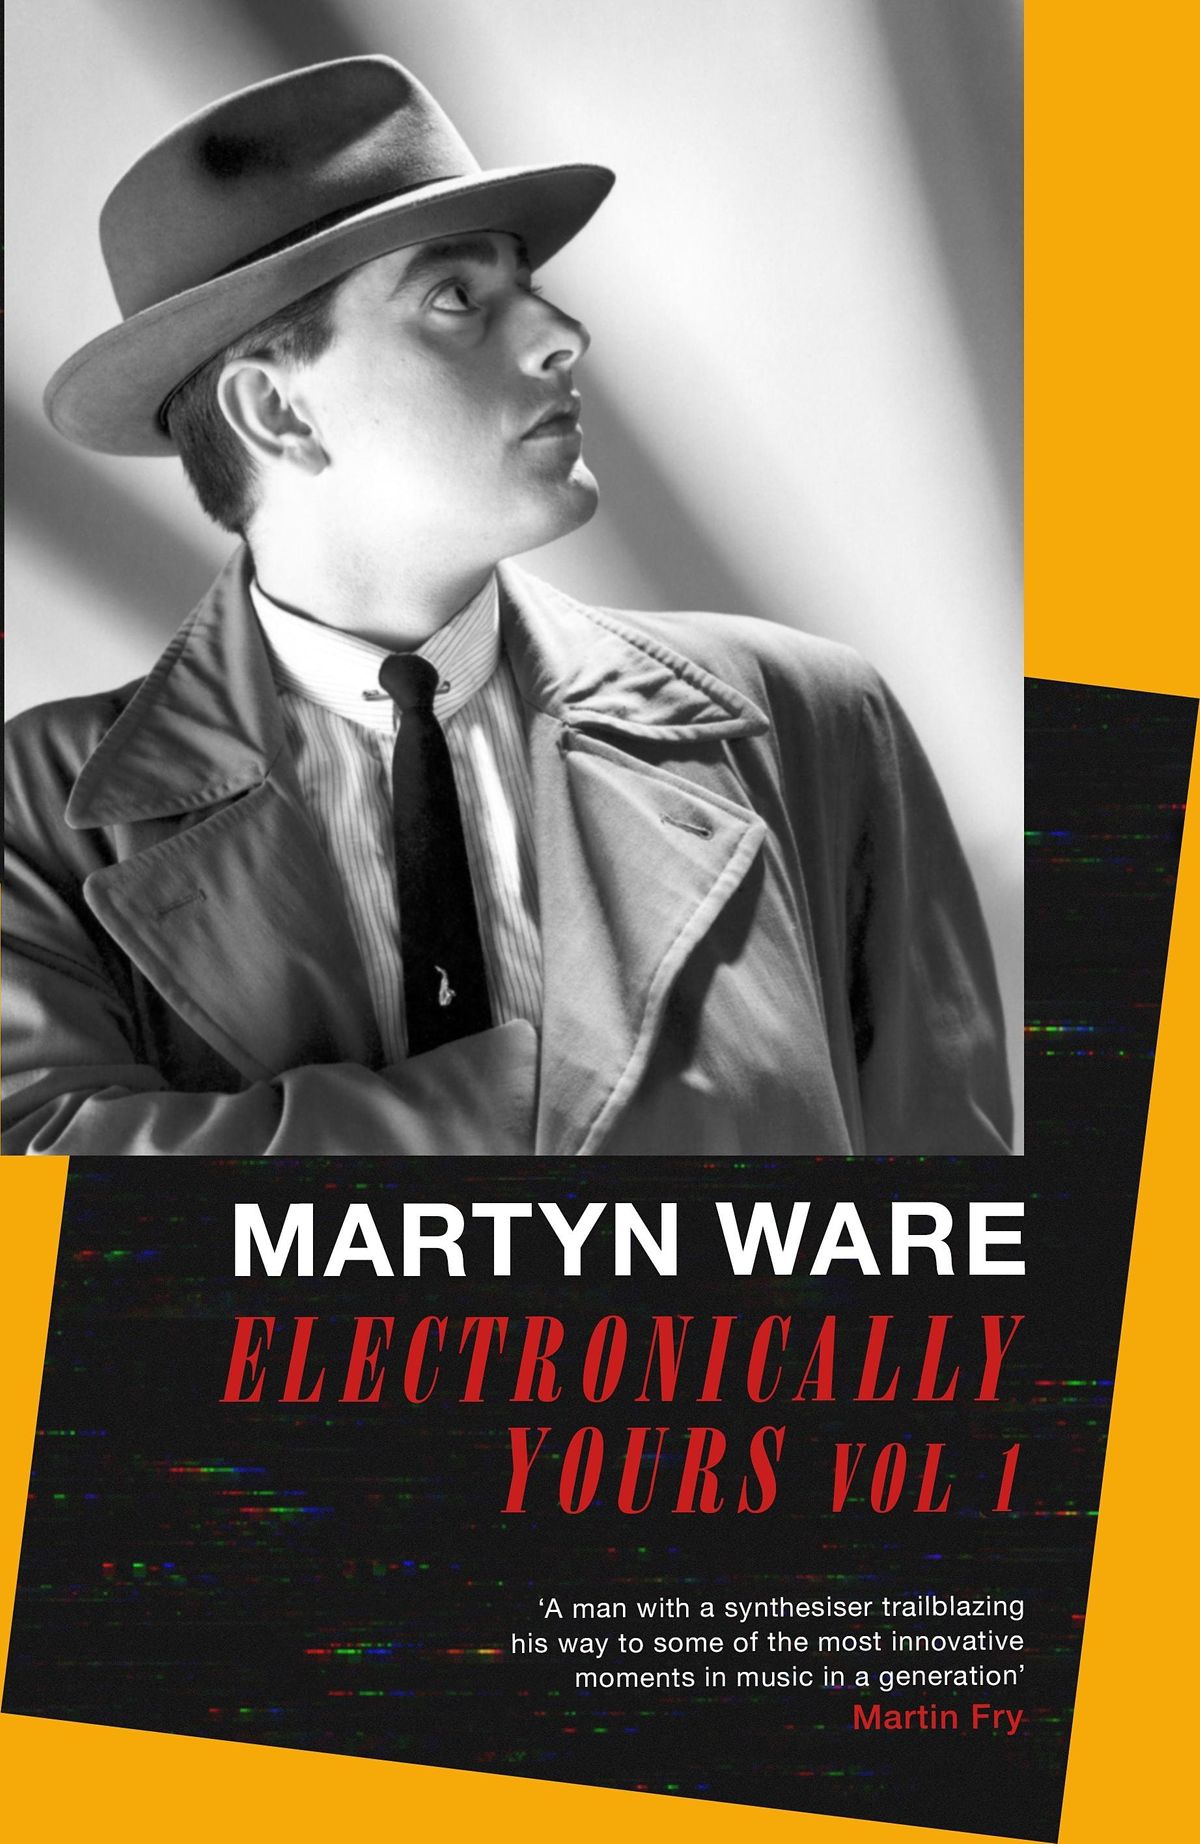 MARTYN WARE: Electronically Yours